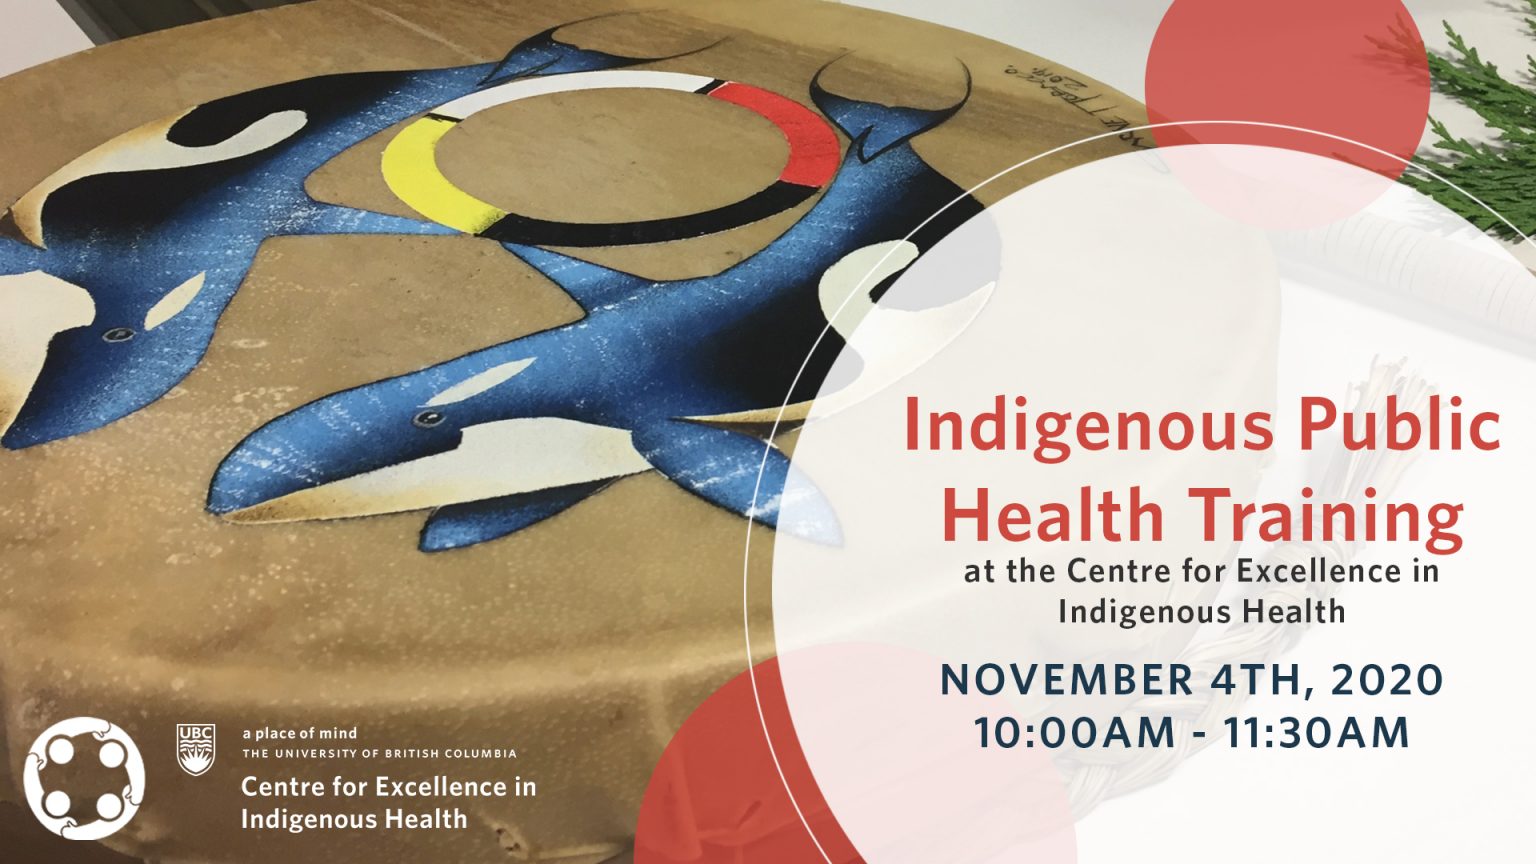 November 4th 2020 Indigenous Public Health Training At The Centre For Excellence In